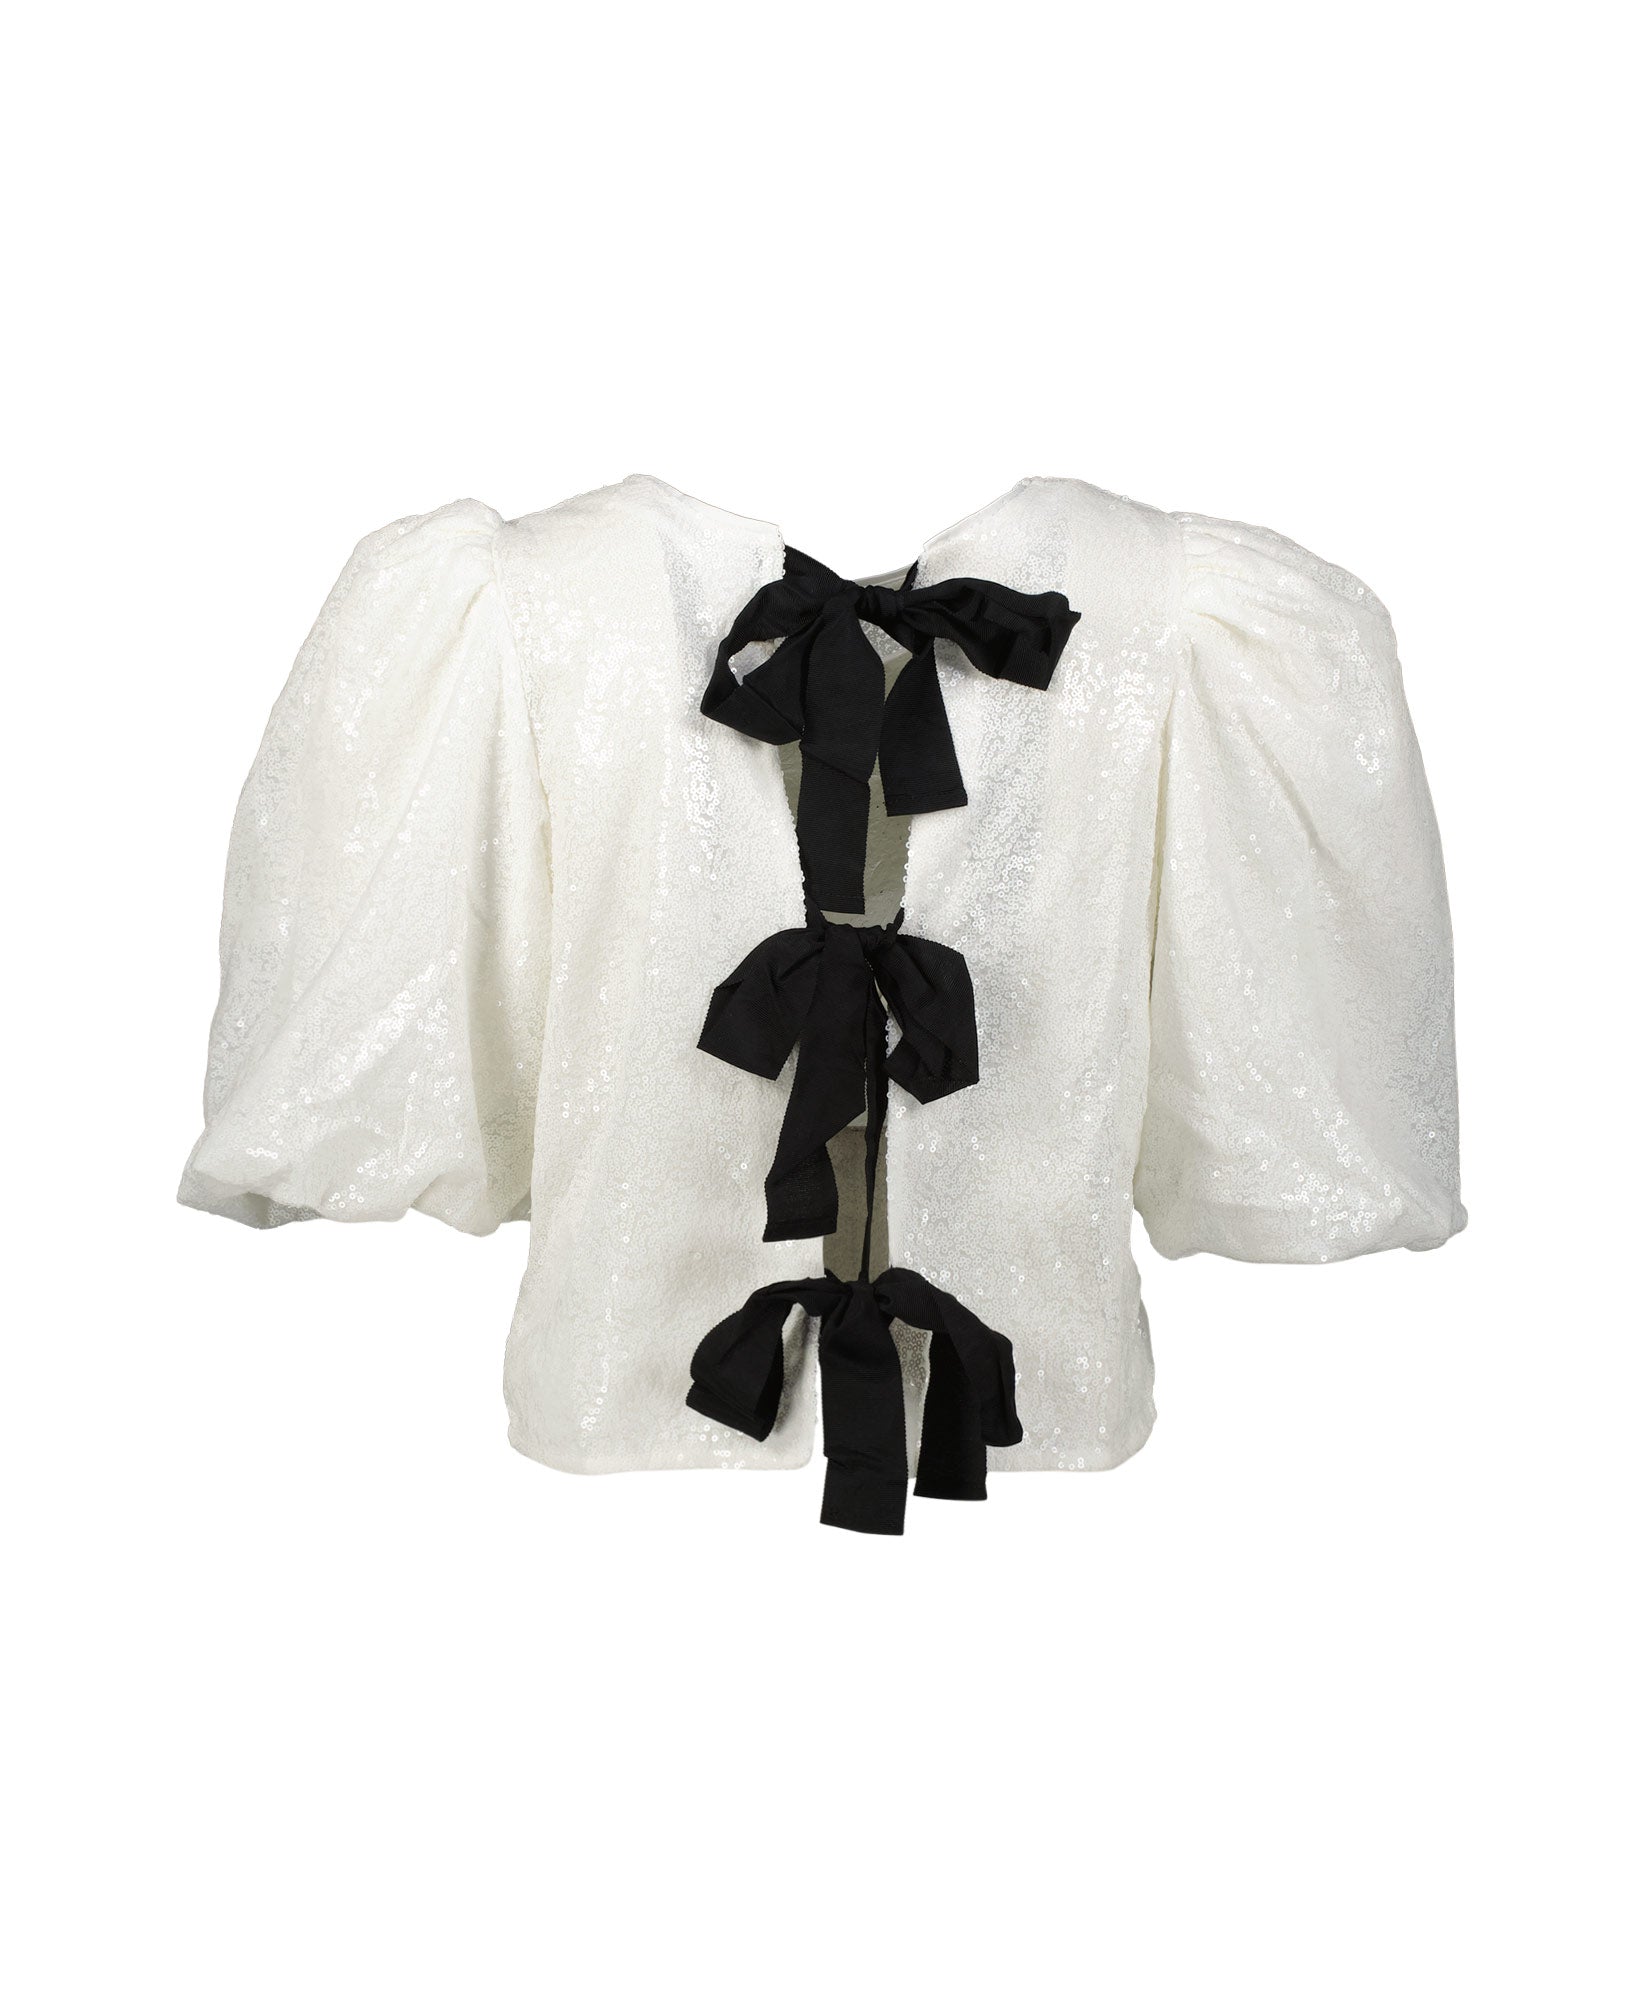 Co'Couture - Stevie Sequin Bow Blouse